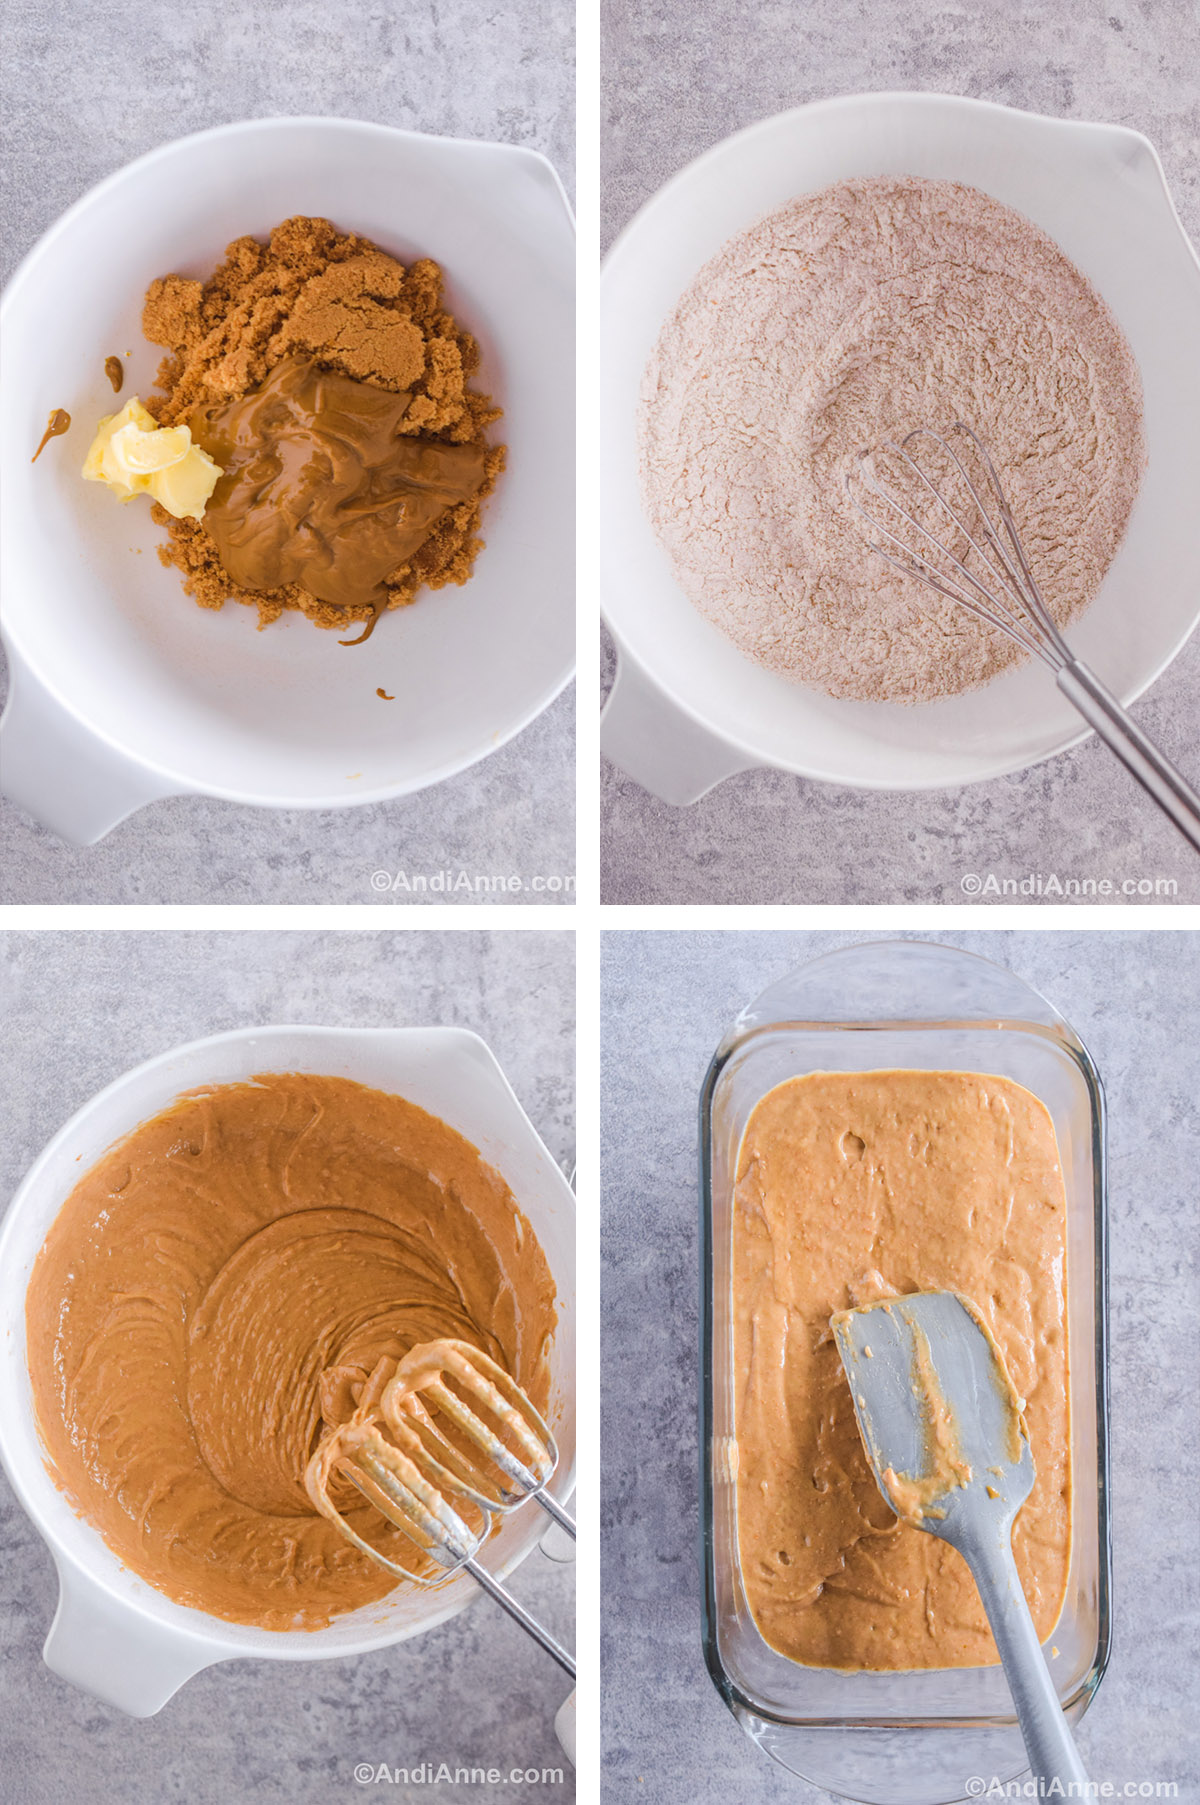 Four images grouped together showing different steps to make the recipe. First is a white bowl with brown sugar, peanut butter and butter inside. Second image is a white bowl with dry ingredients and a metal whisk. Third image is a wet brown batter with a hand mixer. Fourth image is a glass loaf pan with brown batter poured inside and a grey spatula on top.